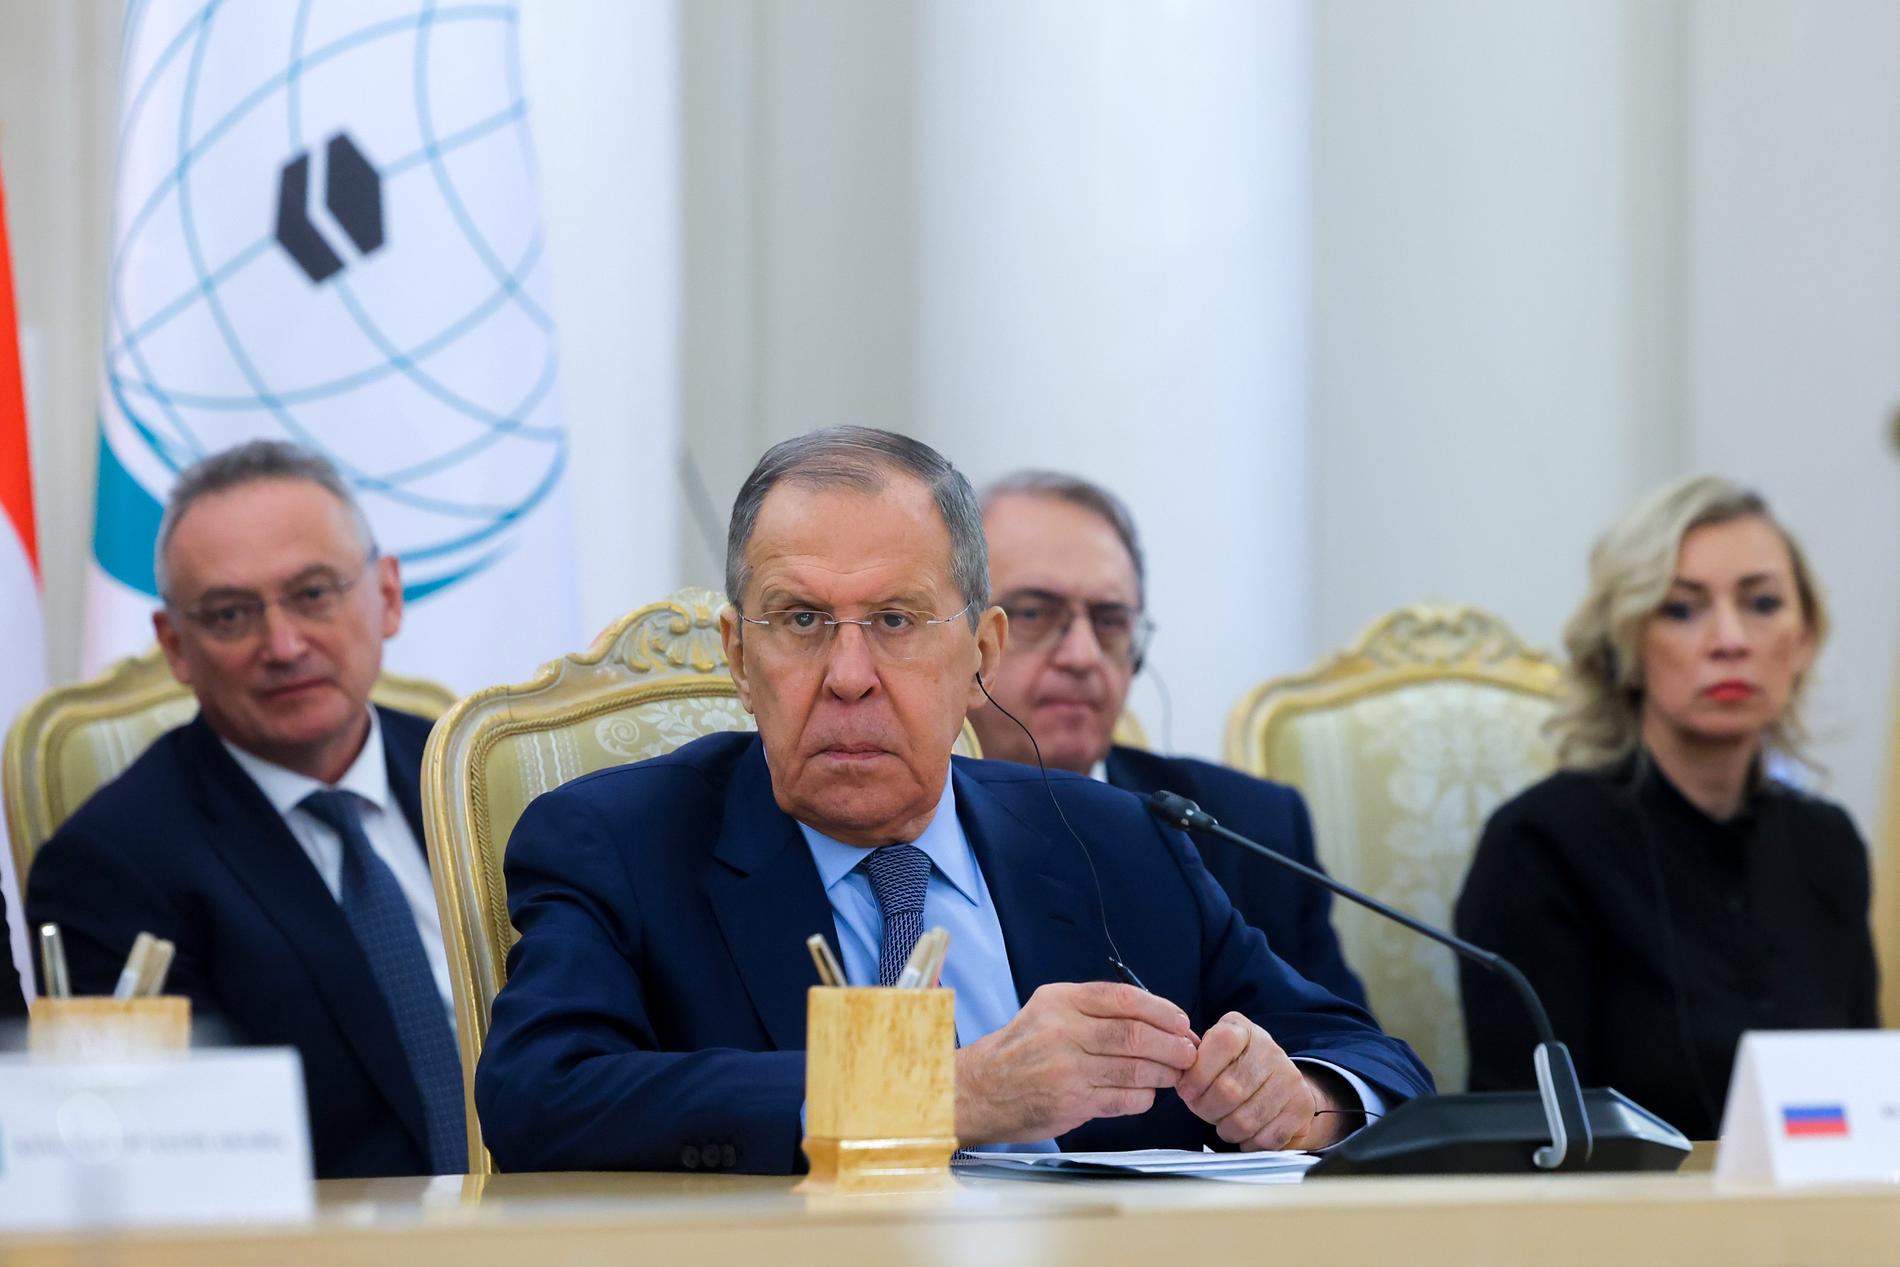 Russian Foreign Minister Sergey Lavrov meeting with foreign ministers from Muslim and Arab countries in Moscow and meeting with NATO countries in Skopje